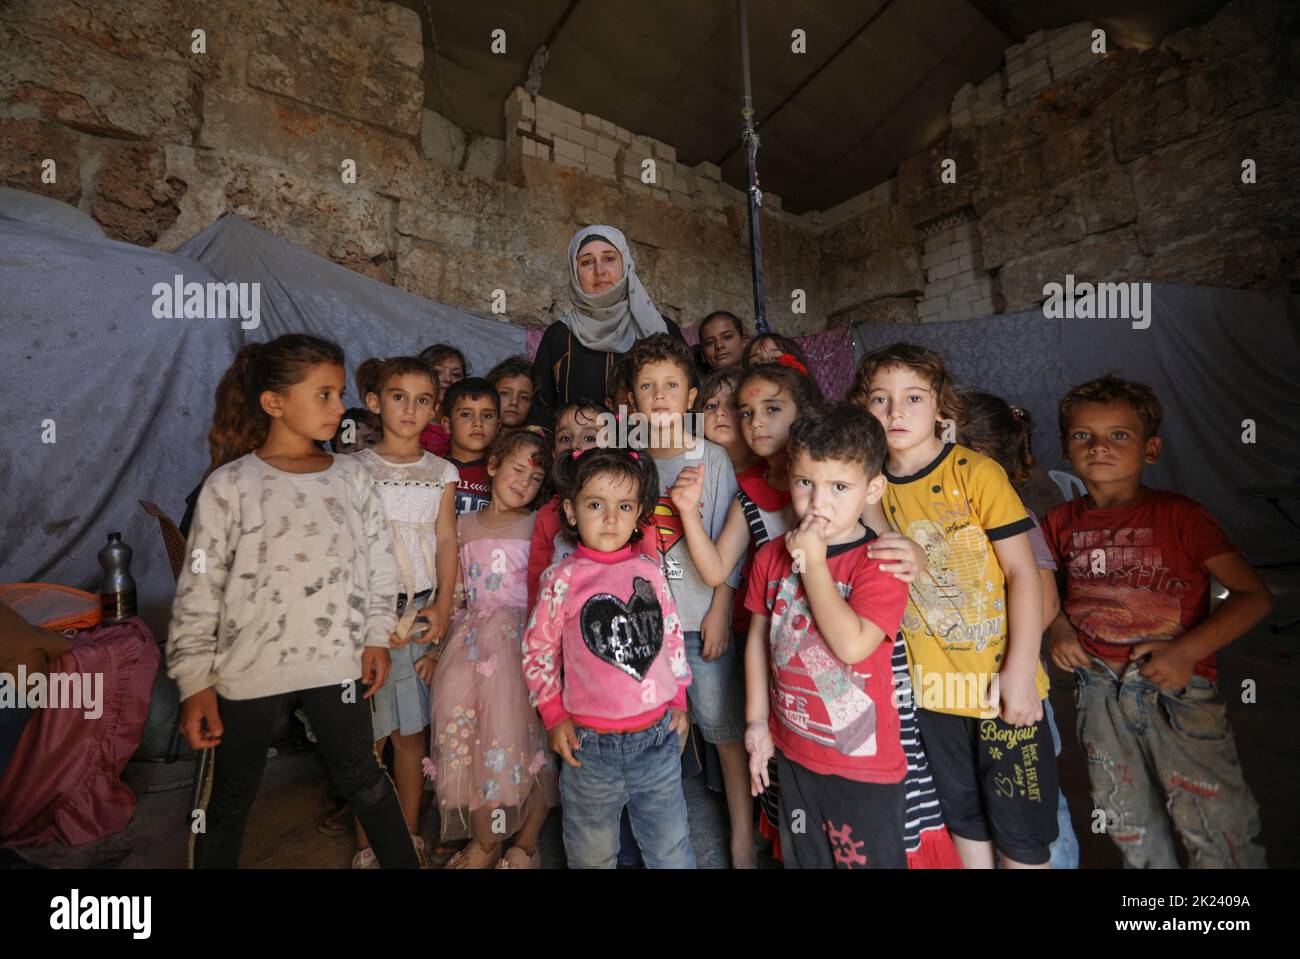 Najlaa Mimar, a history graduate who has transformed a Byzantine castle into a school for the internally displaced children, poses for a picture with students, in the opposition-held Idlib, Syria September 20, 2022. REUTERS/Khalil Ashawi Stock Photo